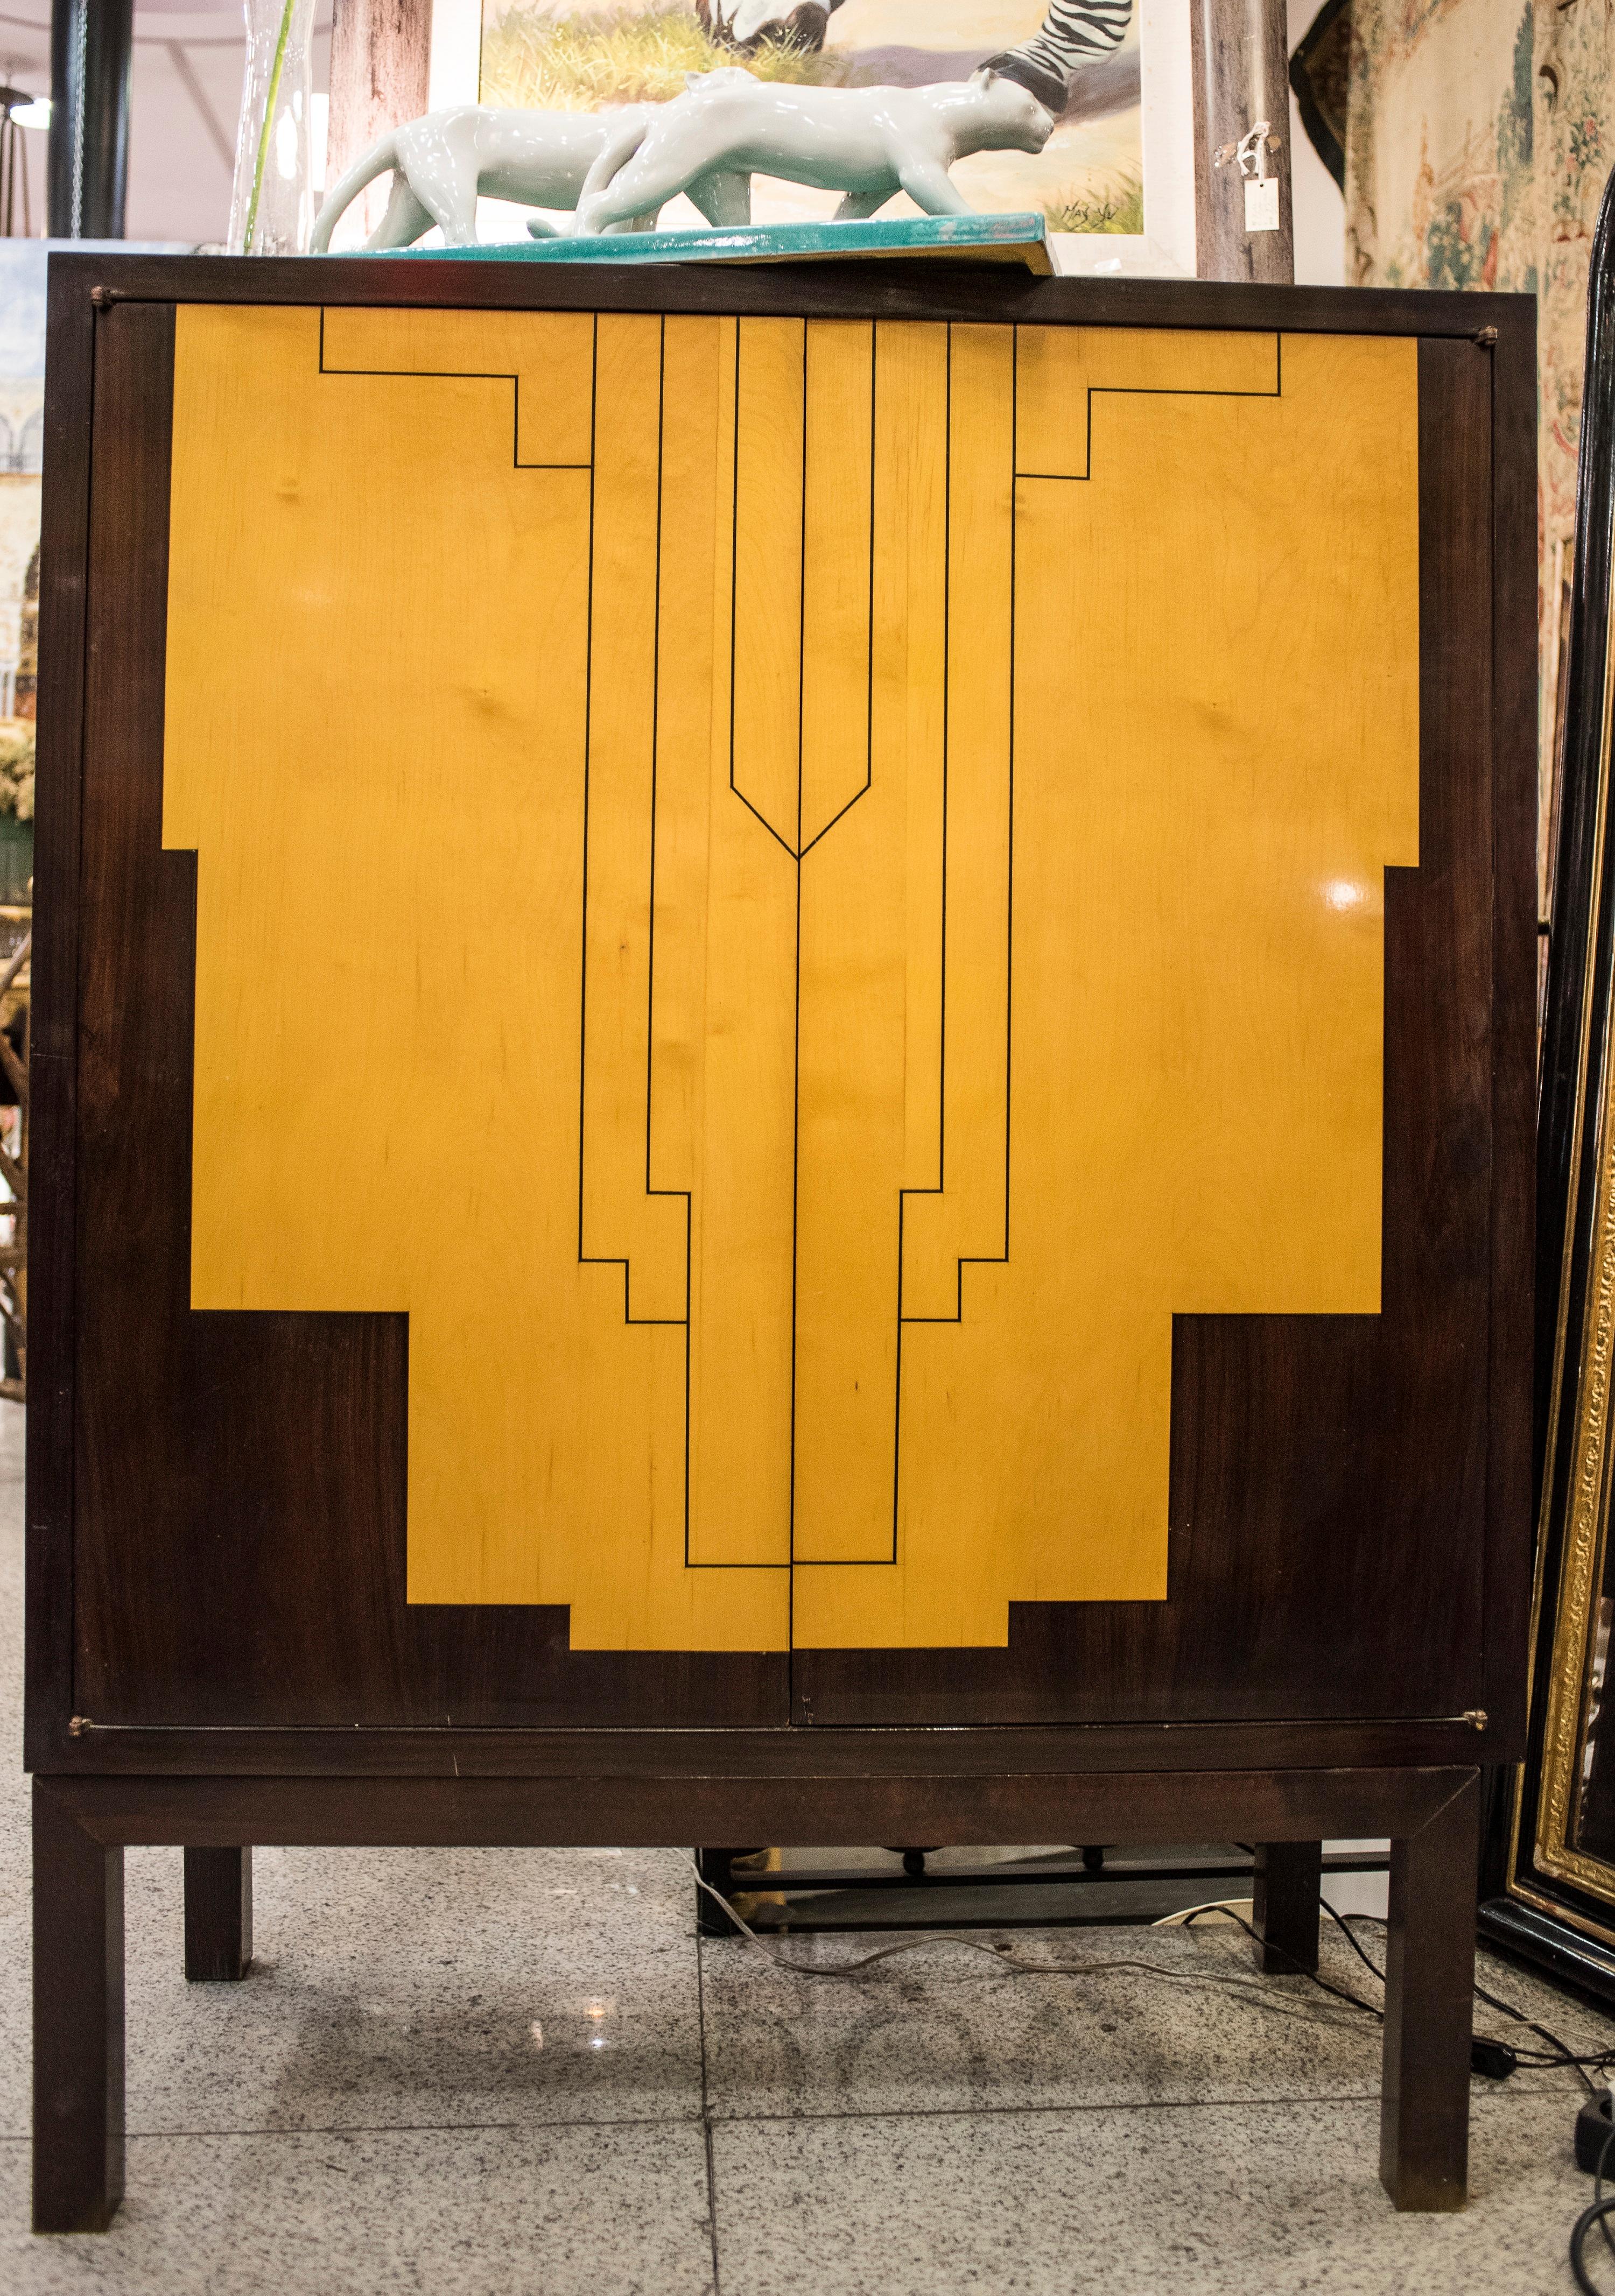 One of a kind late French Art Deco, in rosewood and lemongrass marquetry making a geometric drawing in the doors .Solid rosewood in all cabinet. Interior with shelves , but it can be used for a dry bar too.
It comes from a private South France